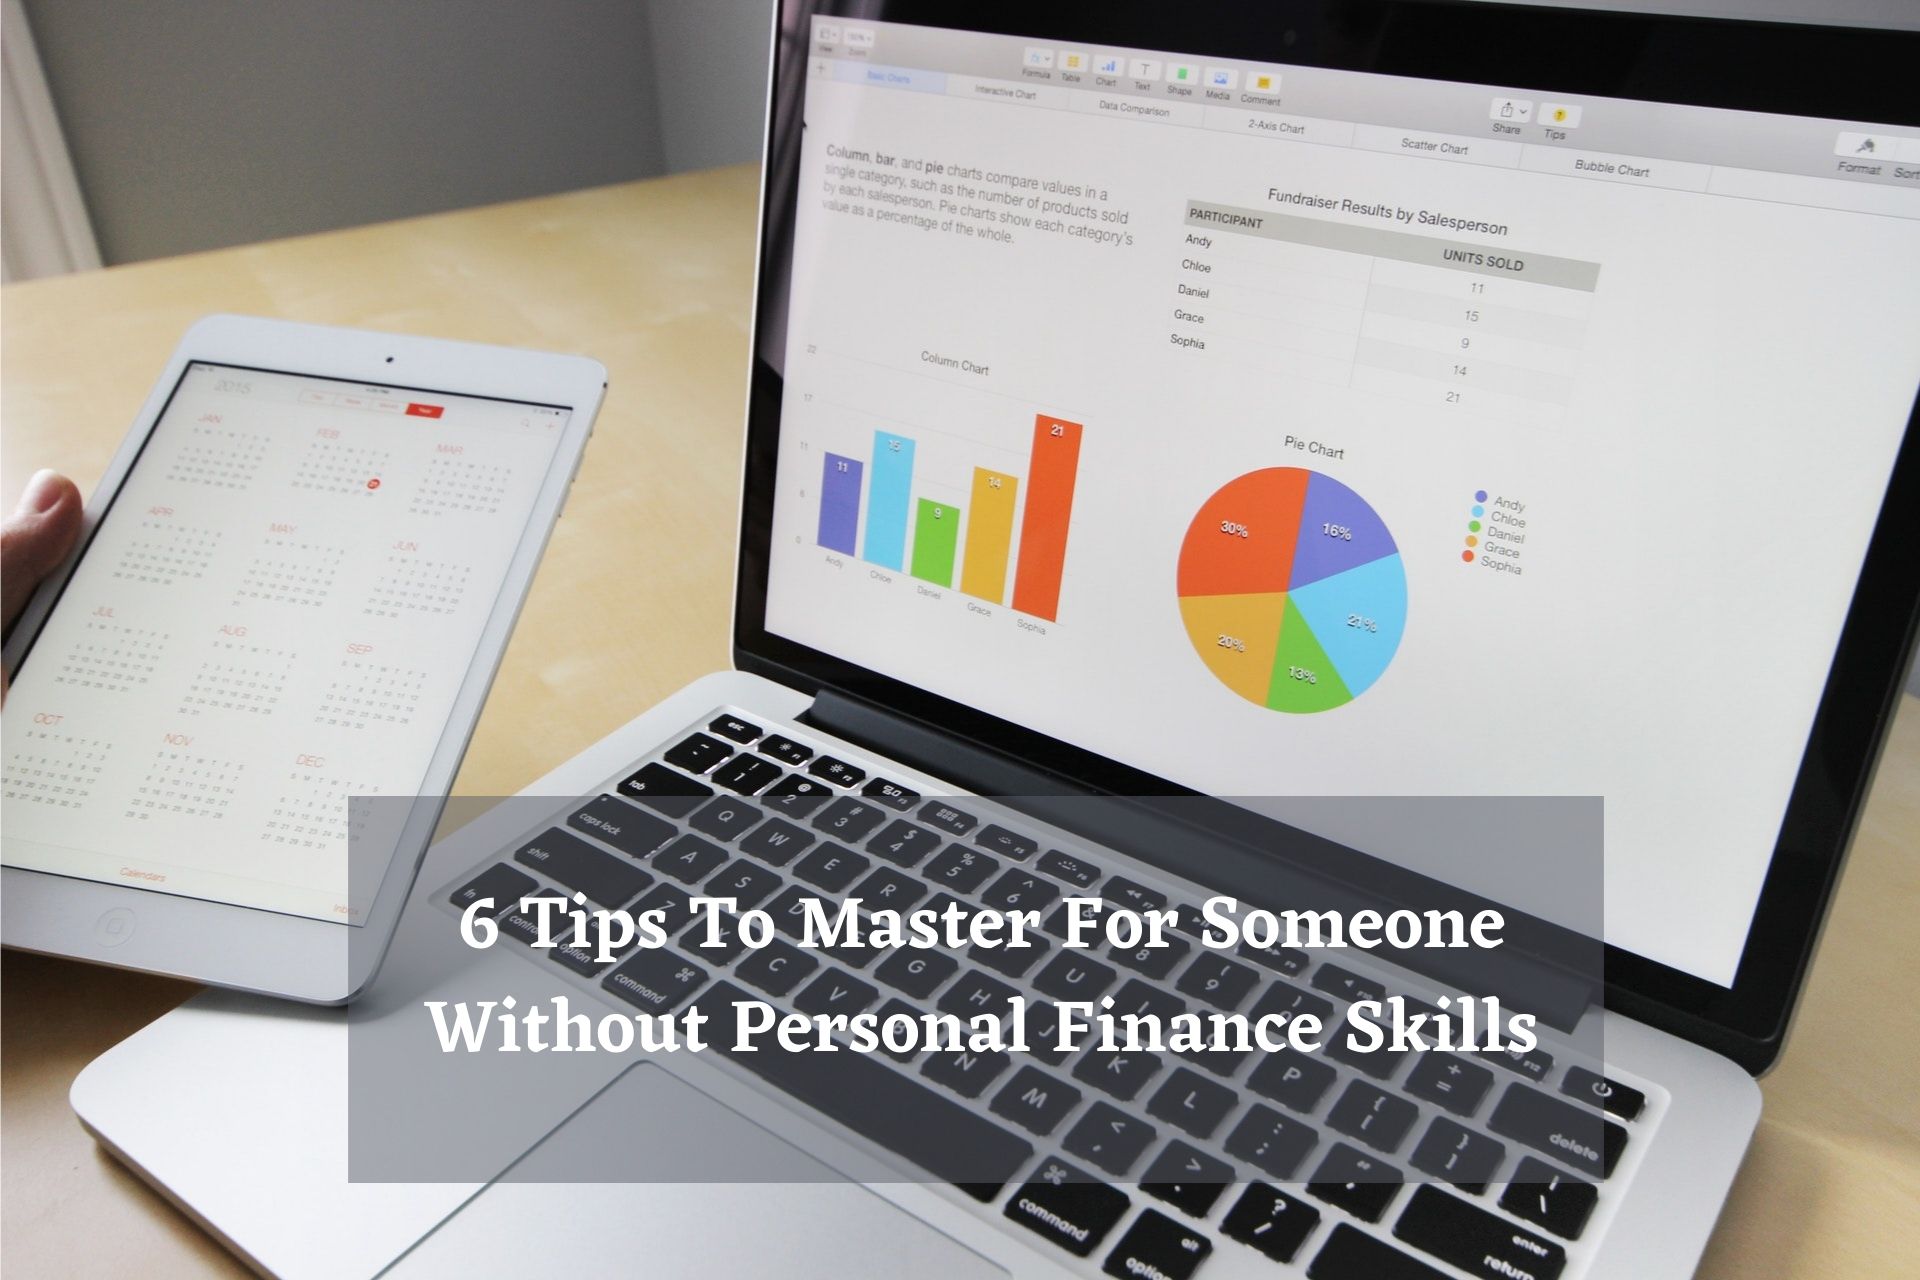 6 tips to master for someone without financial skills